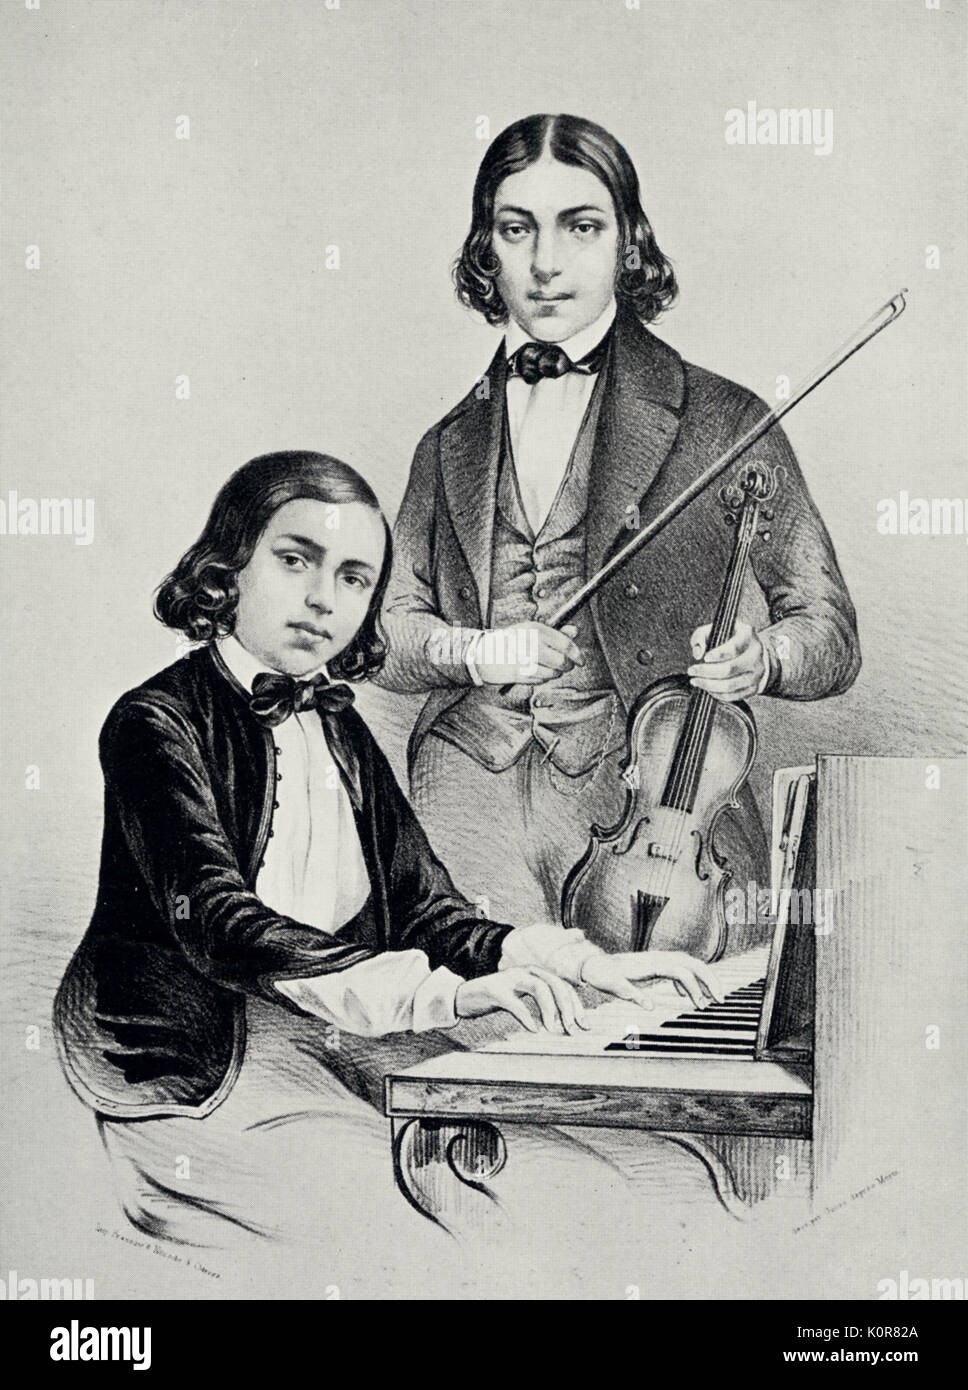 WIENIAWSKI, Jozef at piano and Henryk with violin. Polish pianist and composer 1837 - 1912, brother of Henryk Wieniawski; Polish violinist and composer (1835 - 1880) Stock Photo